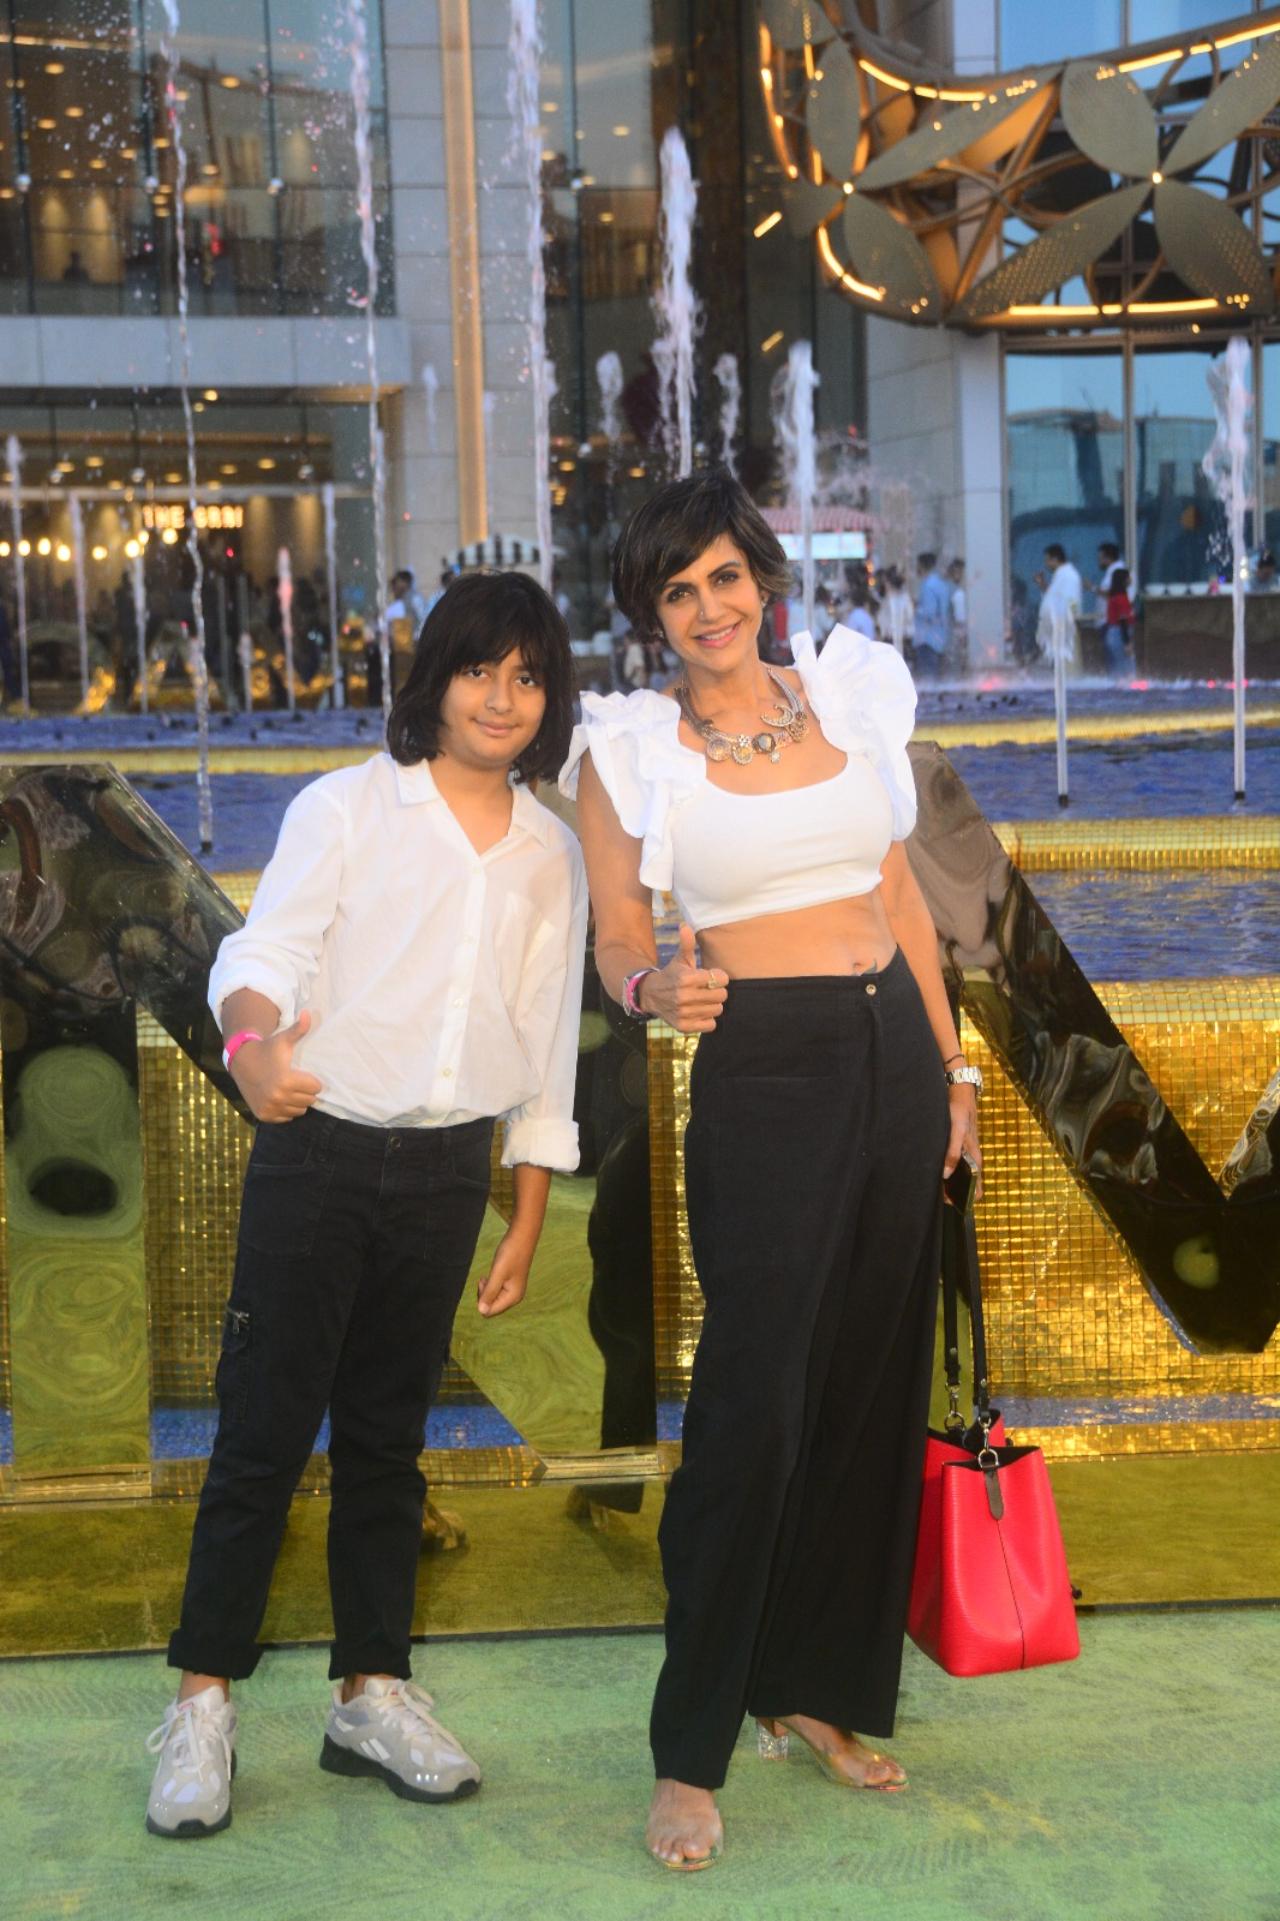 Mandira Bedi twinned with her son in a black-and-white outfit